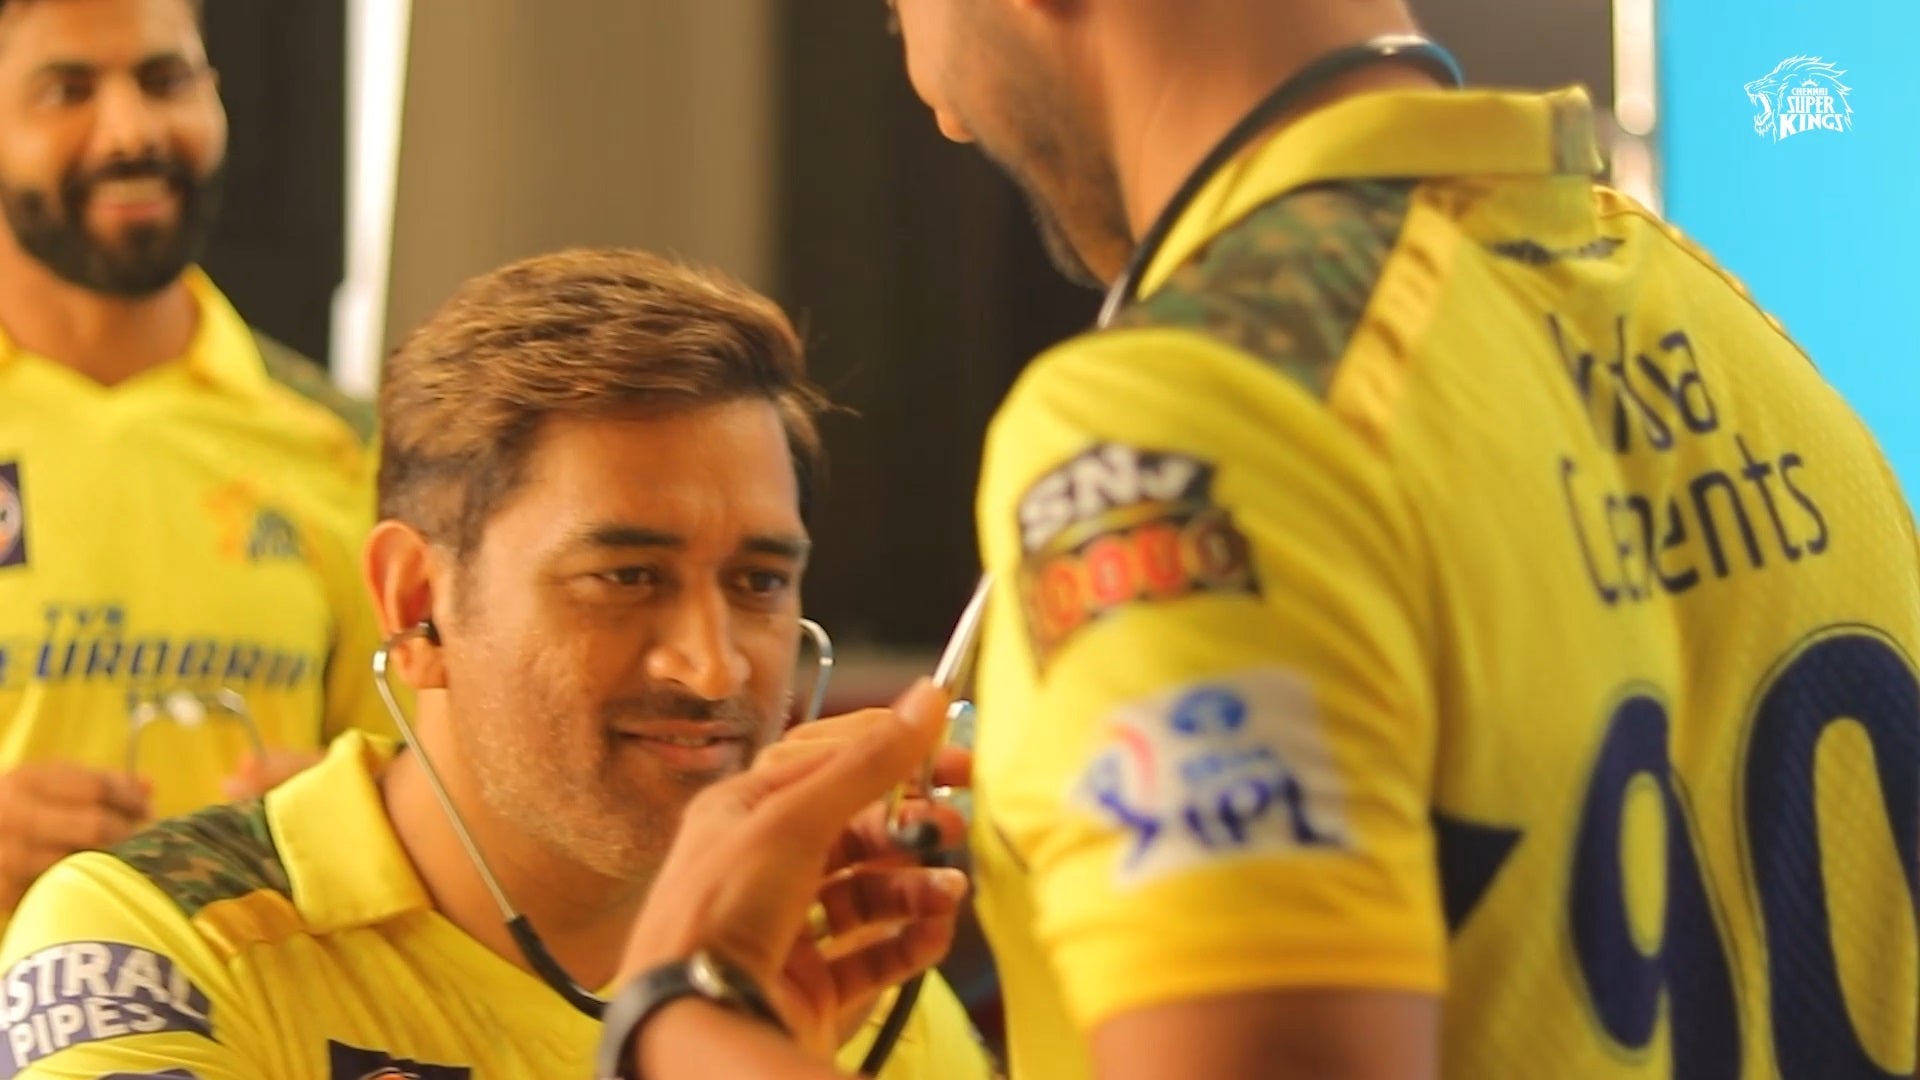 MS Dhoni’s candid moments behind the scenes on JioTV